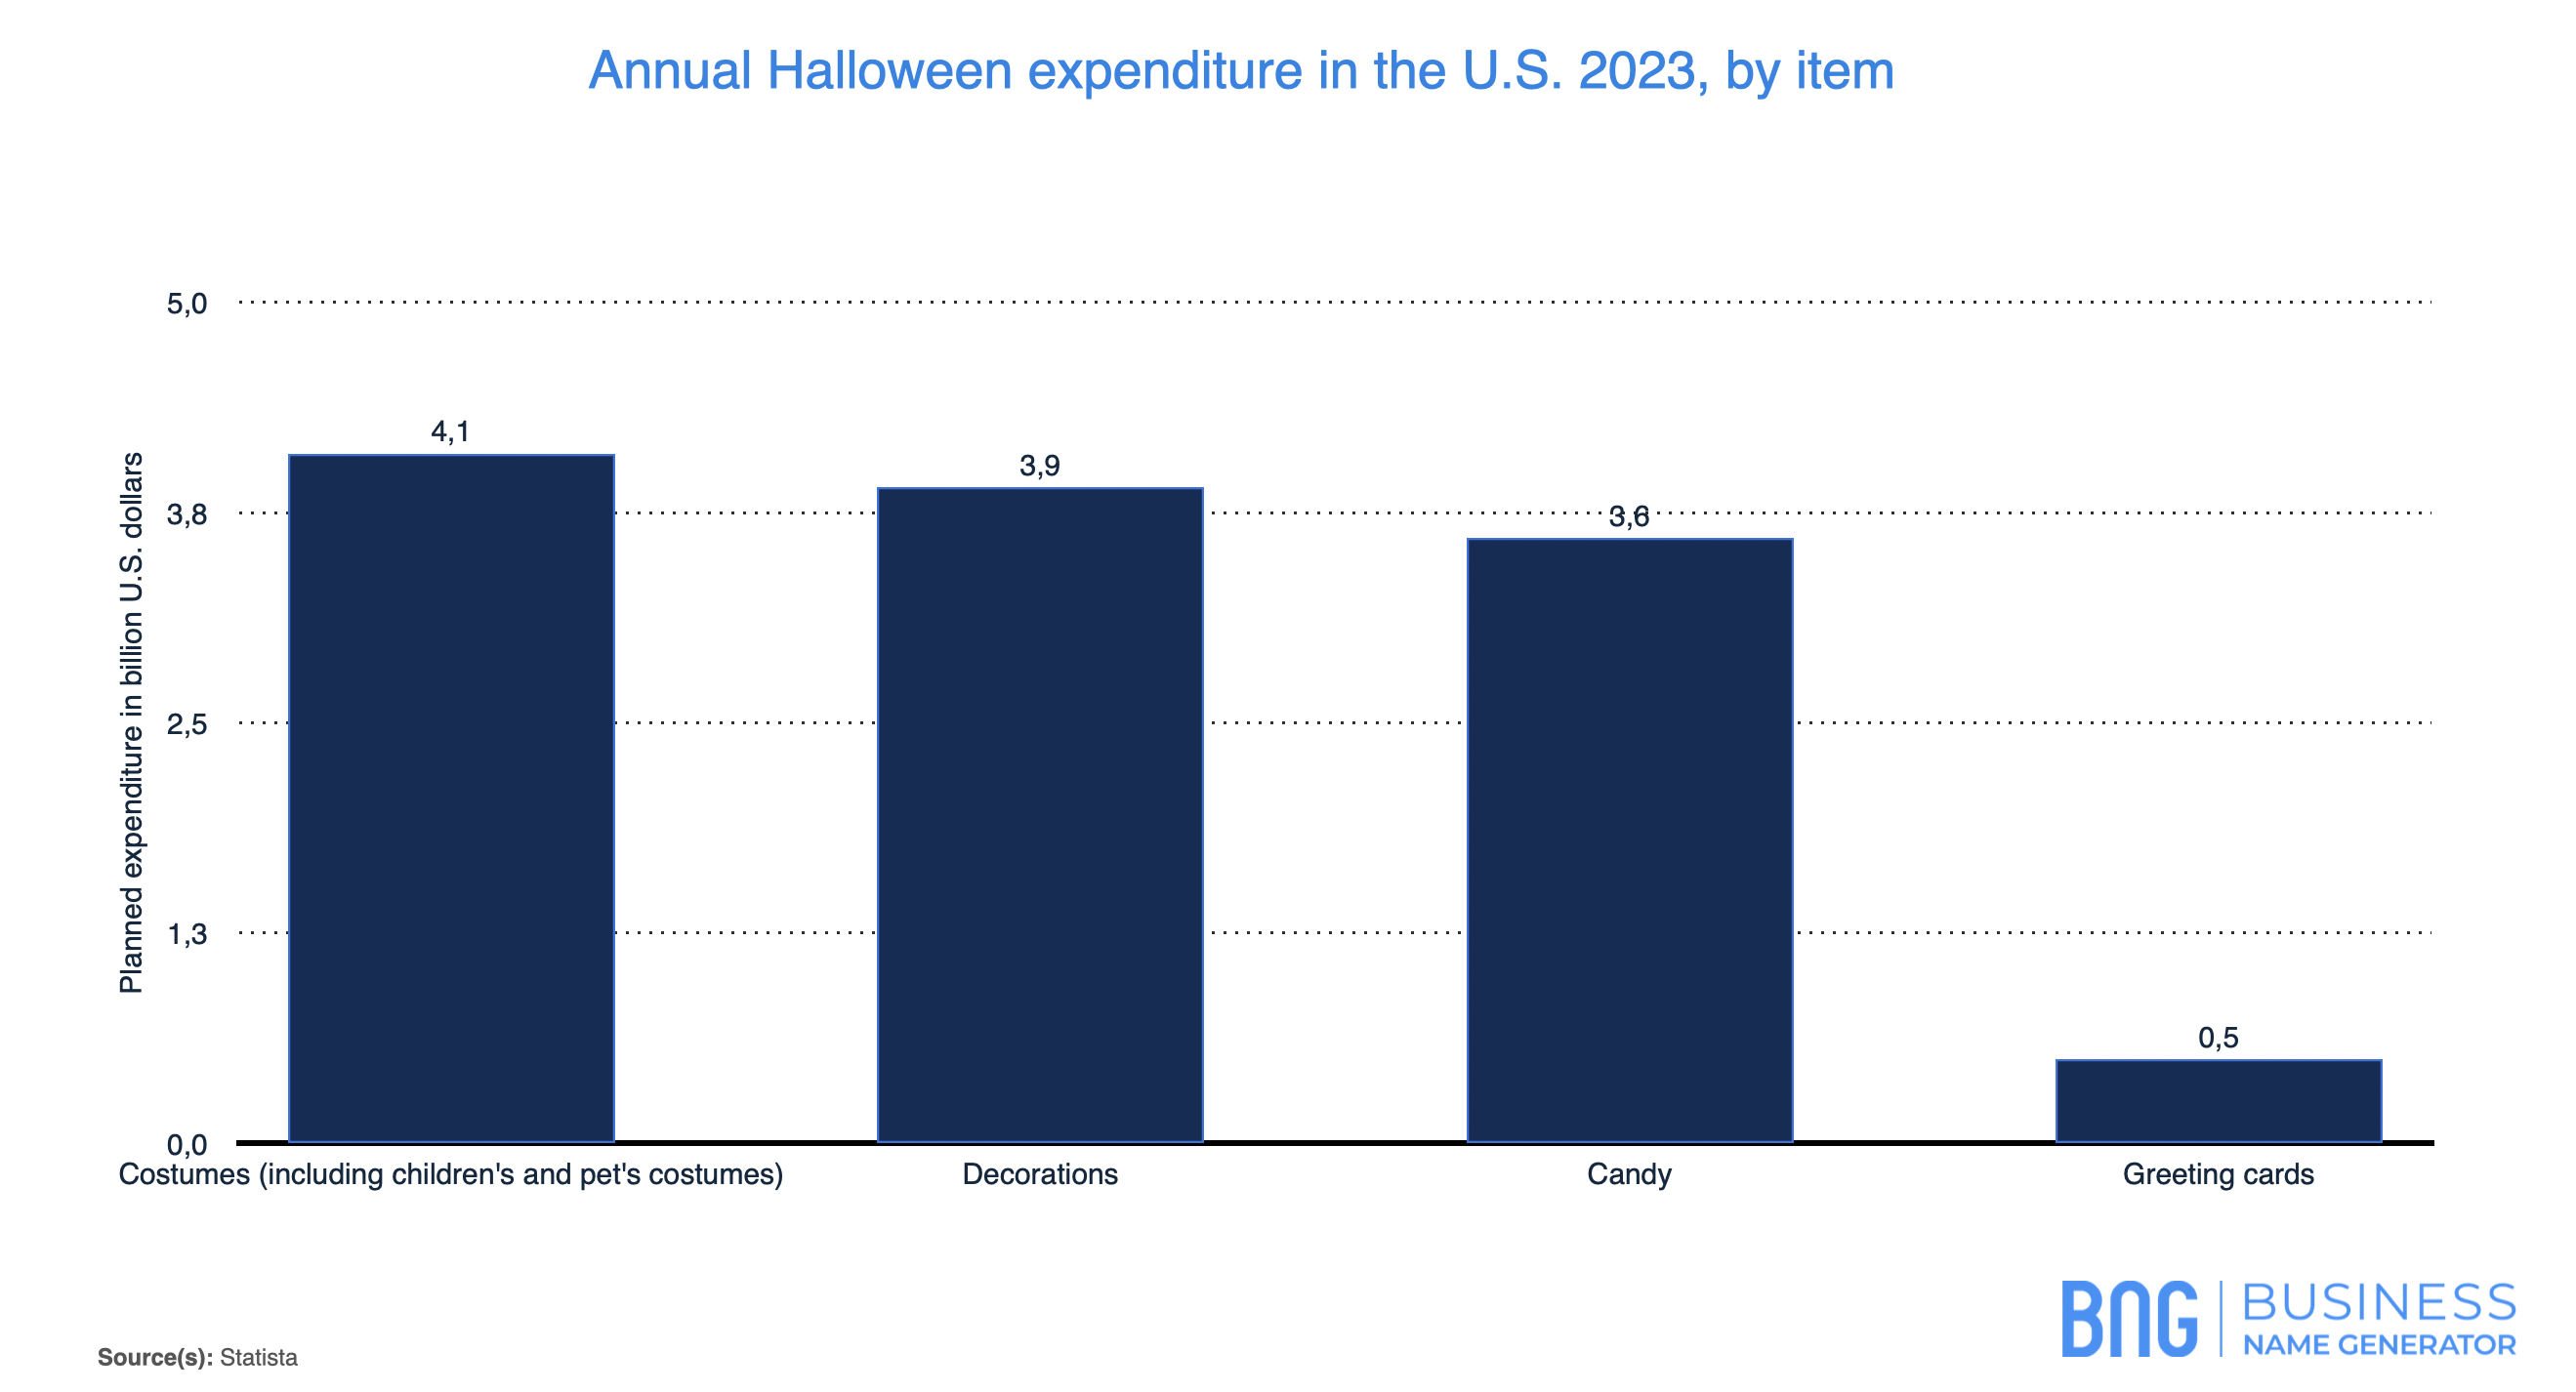 graph for annual Halloween expenditure in the U.S. 2023, by item